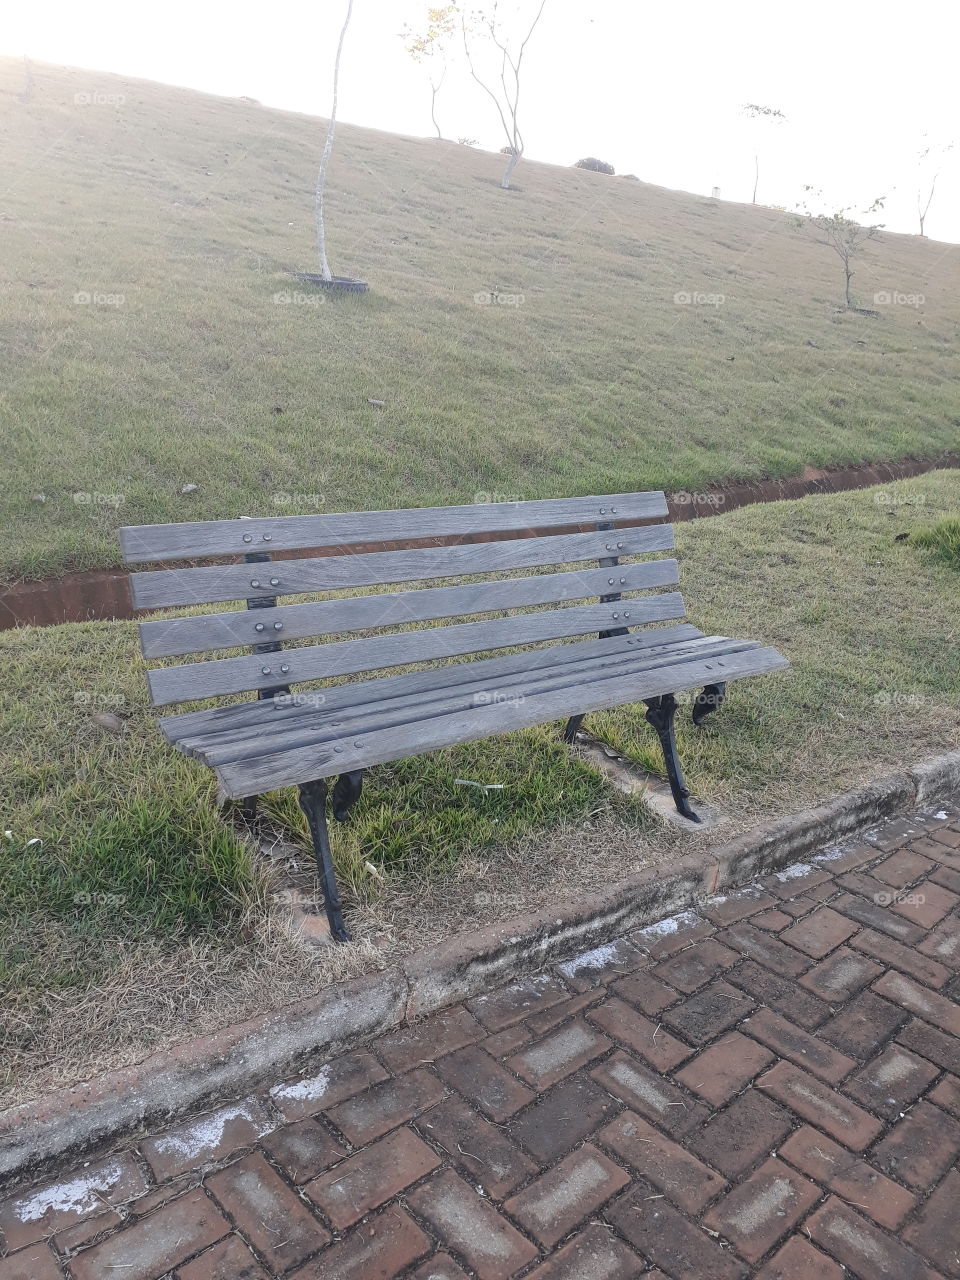 An empty bench at an empty park. Clearly peaple are discouraged because of the cold weather.